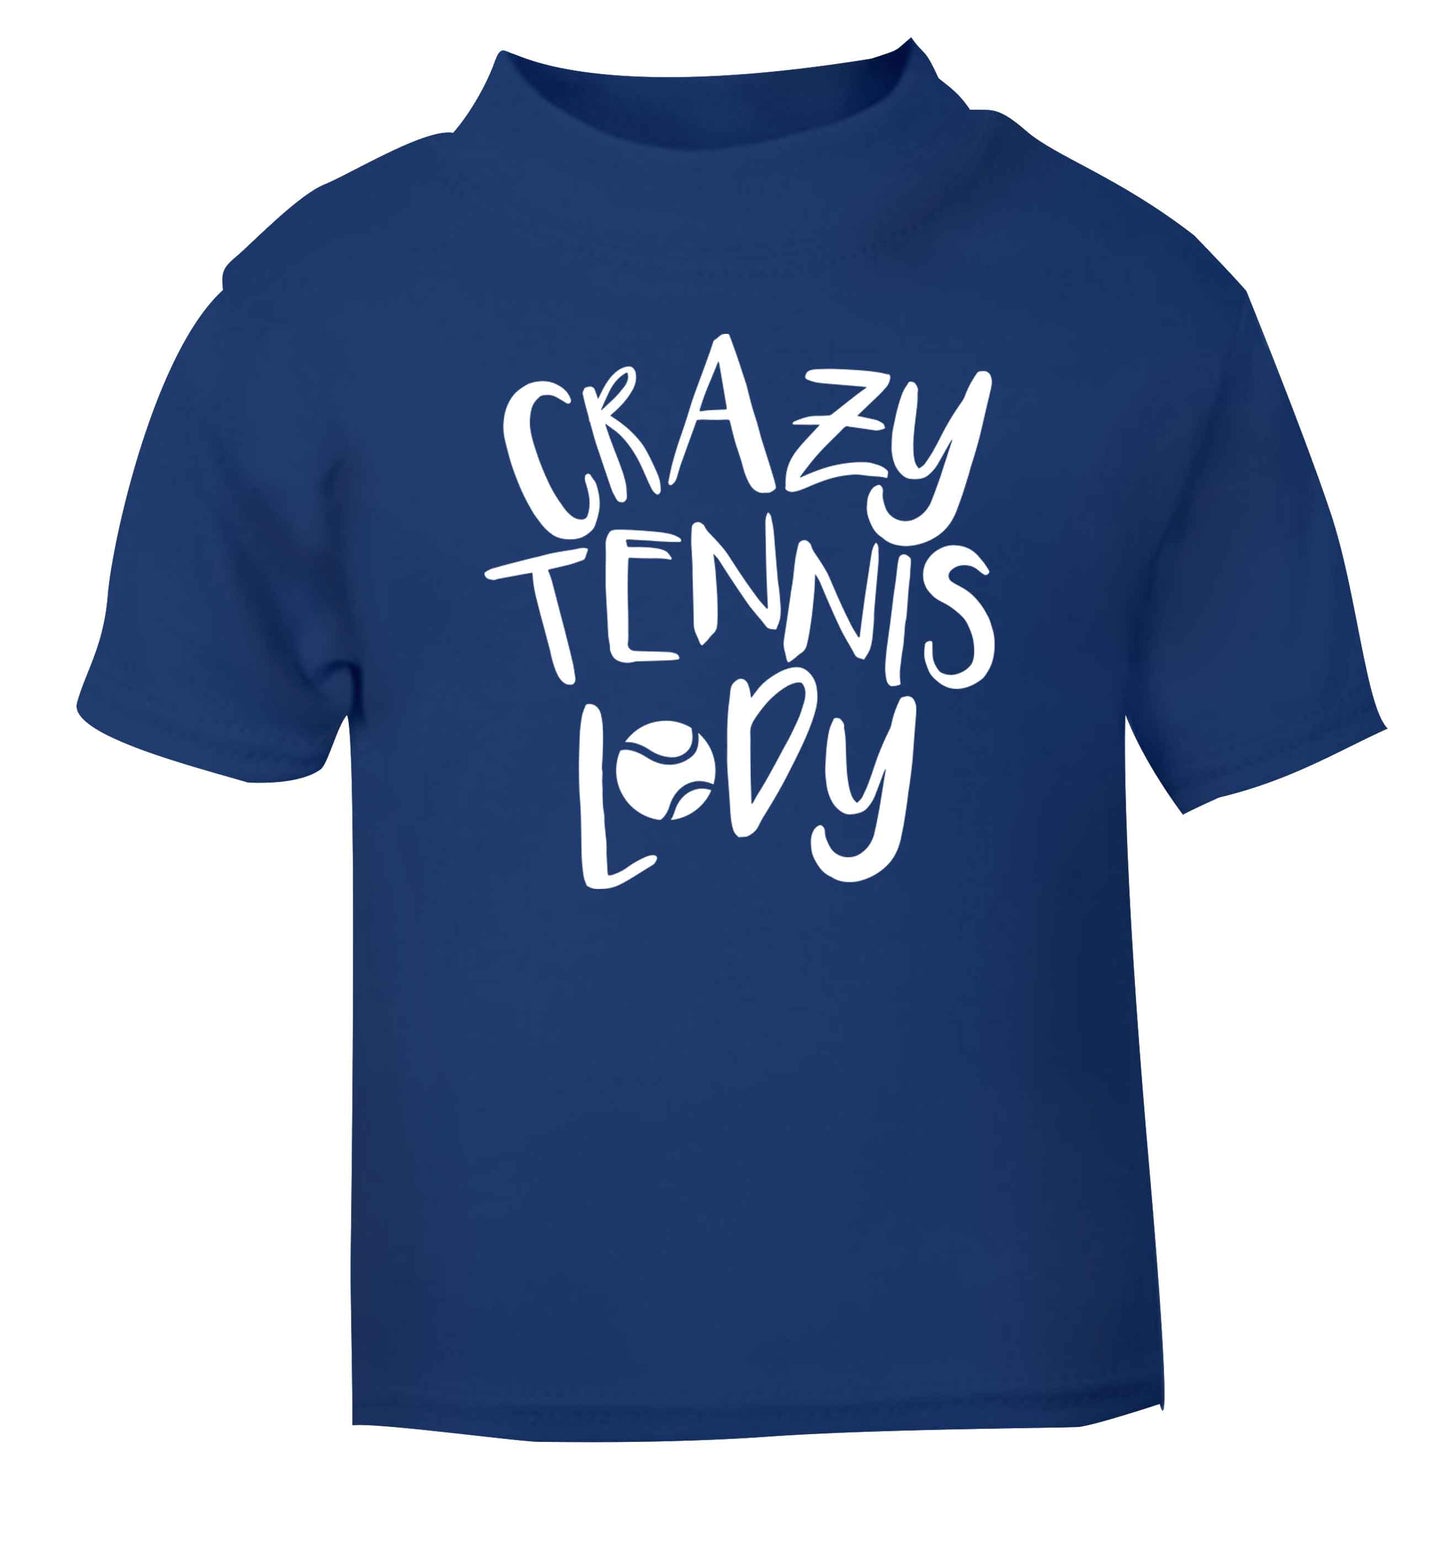 Crazy tennis lady blue Baby Toddler Tshirt 2 Years